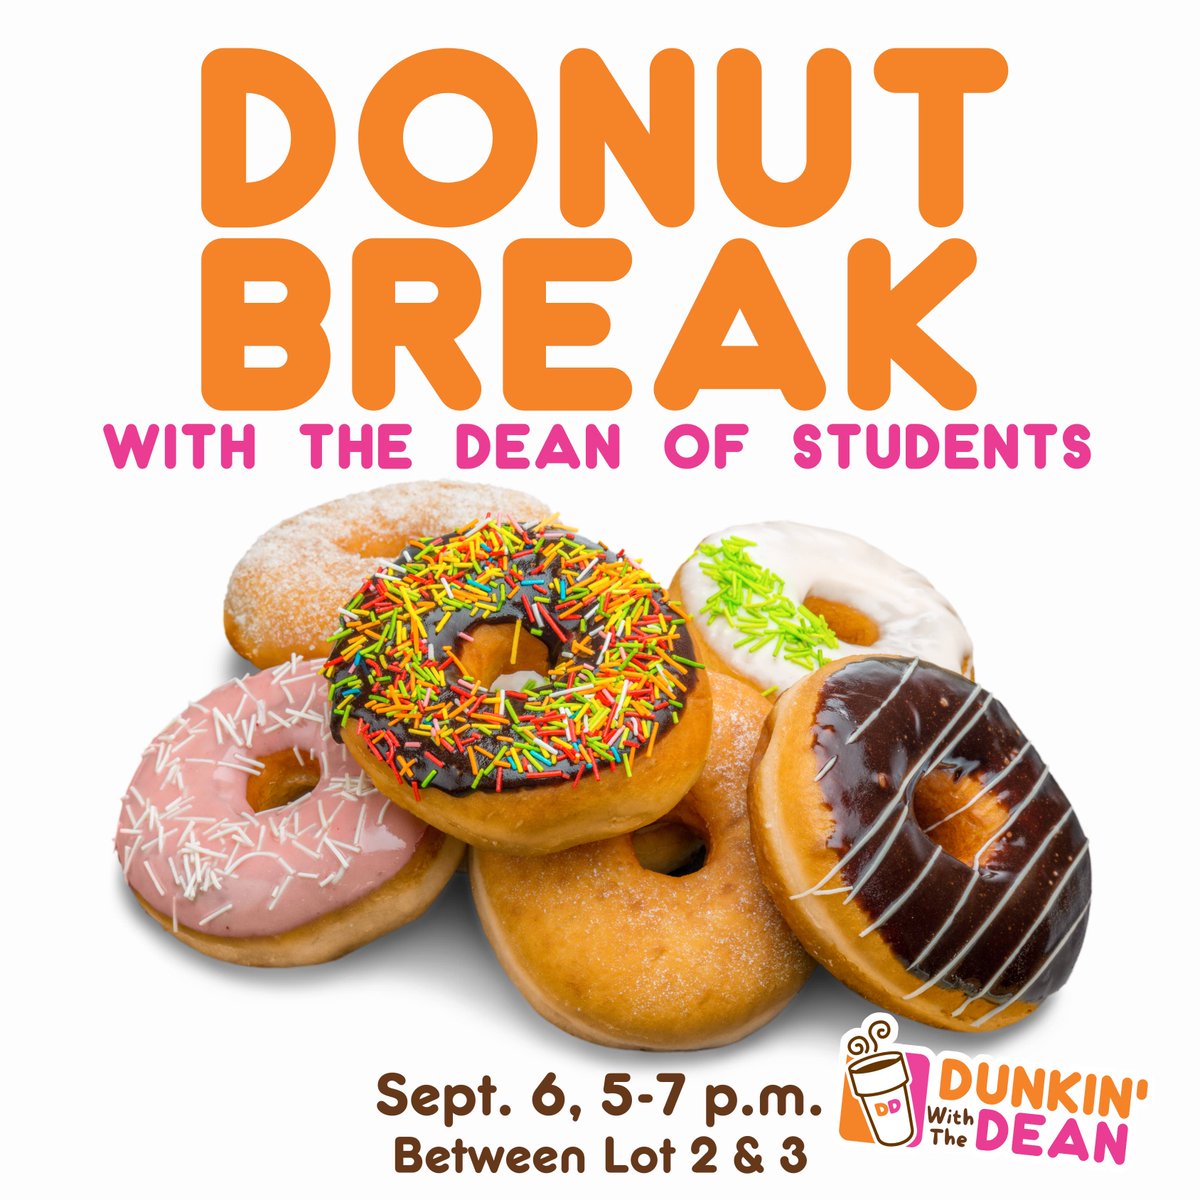 🍩🍩DONUT miss the opportunity to get free donuts tomorrow at Dunkin’ with the Dean from 5- 7 p.m.! 🍩🍩 #TAMUSA  #StudentSuccess #Engagement #Jaguars #DonutBreak